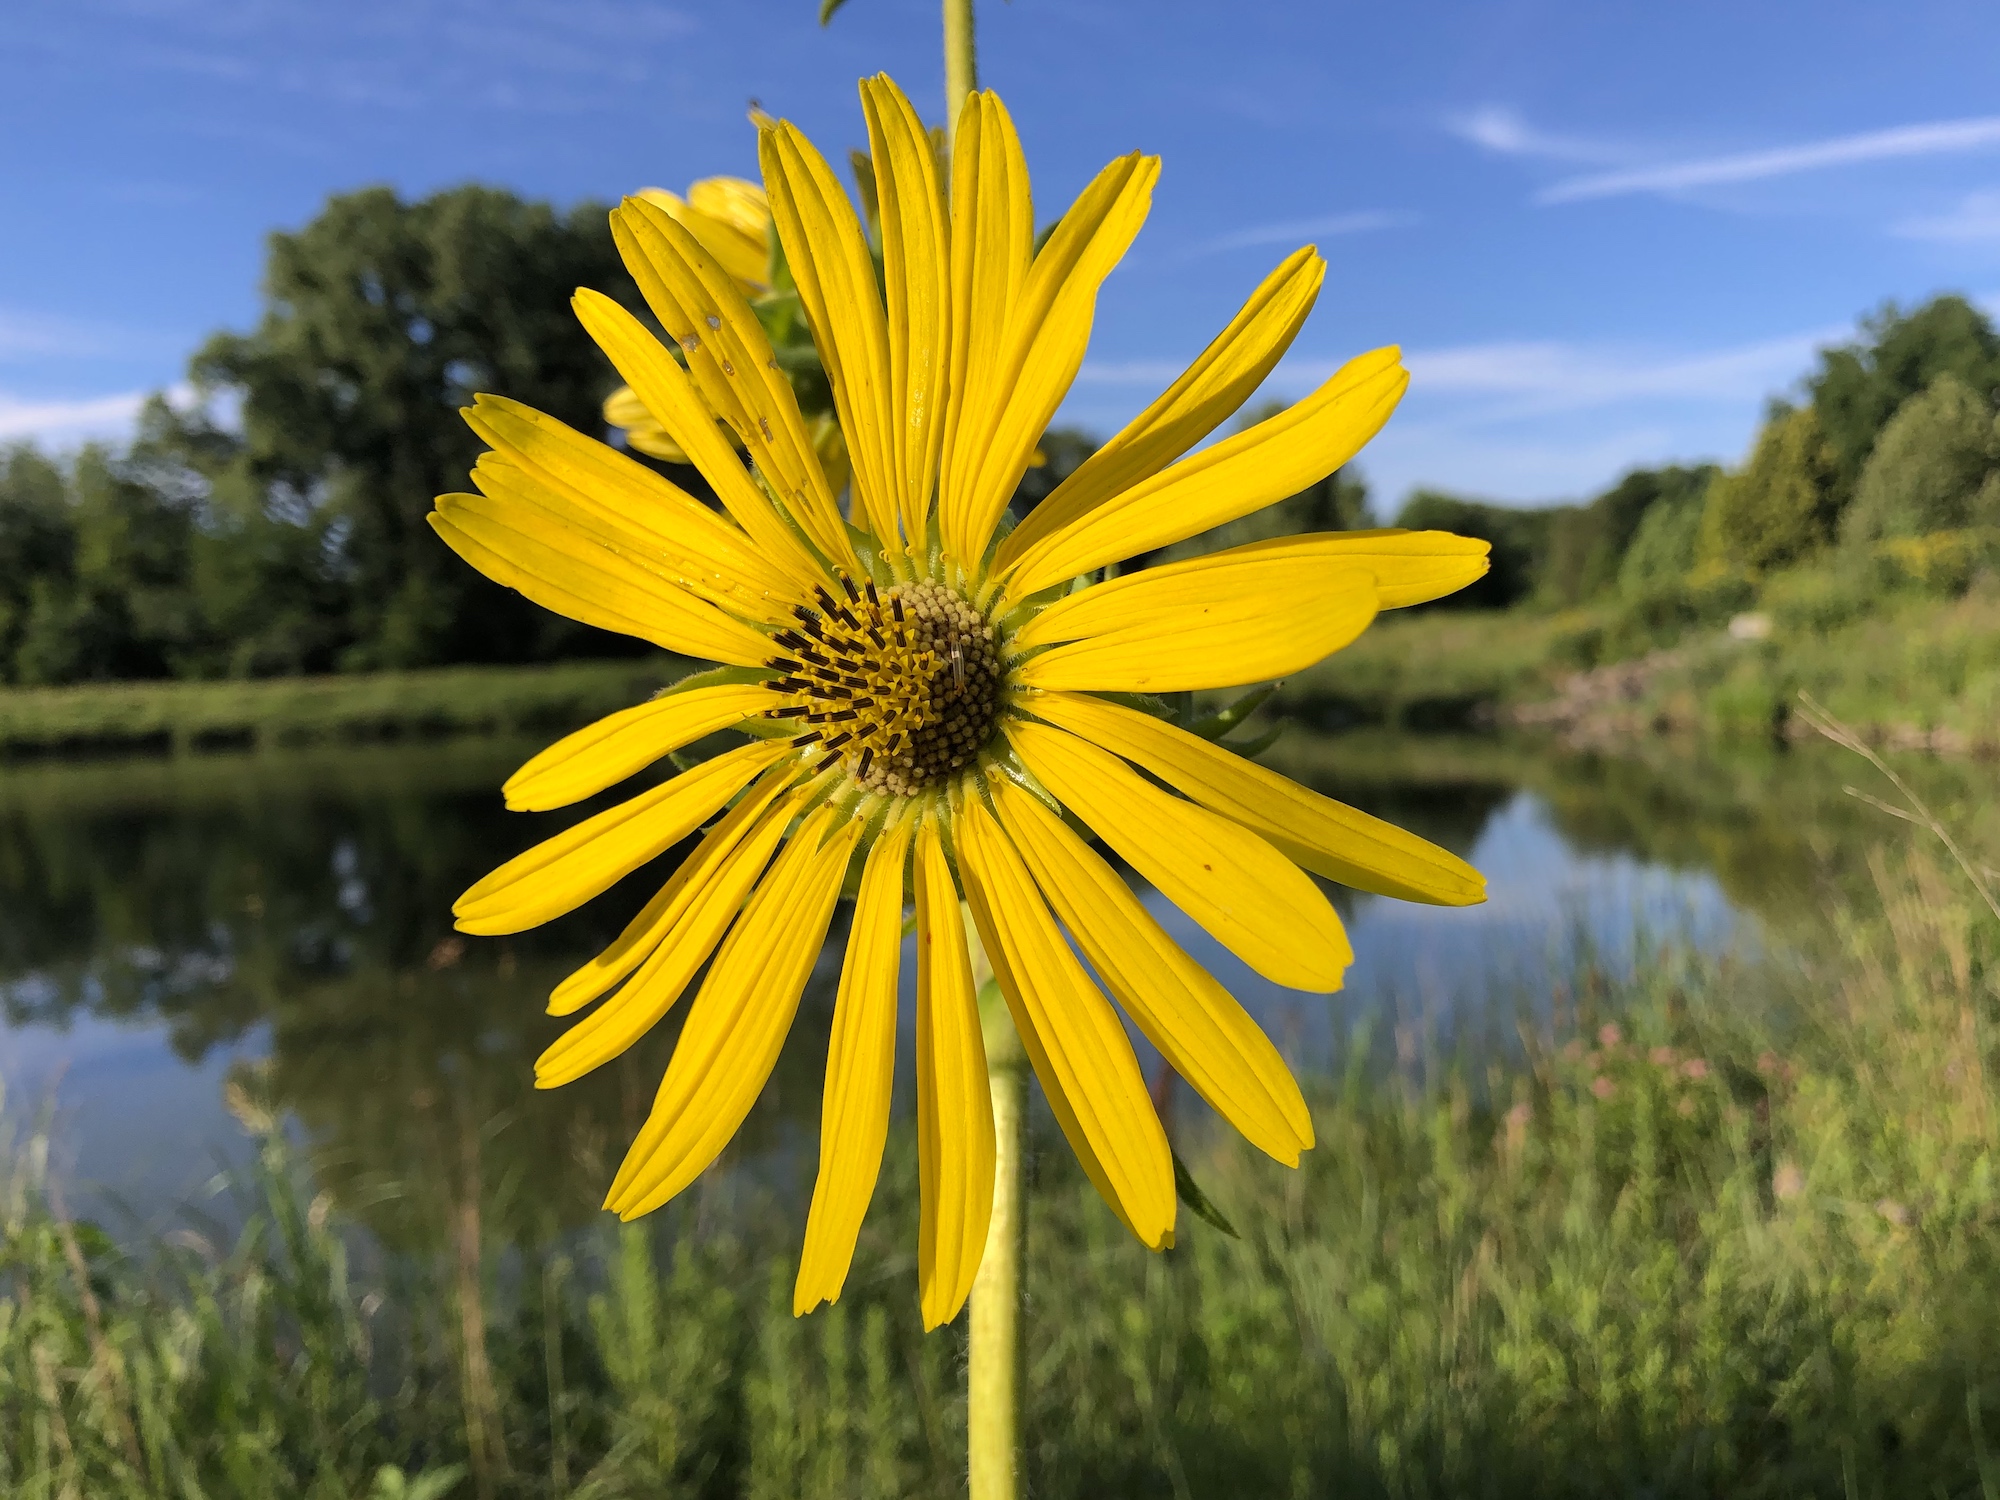 Compass Plant on the shore of the retaining pond on the corner of Nakoma Road and Manitou Way in Madison, Wisconsin on July 31, 2020